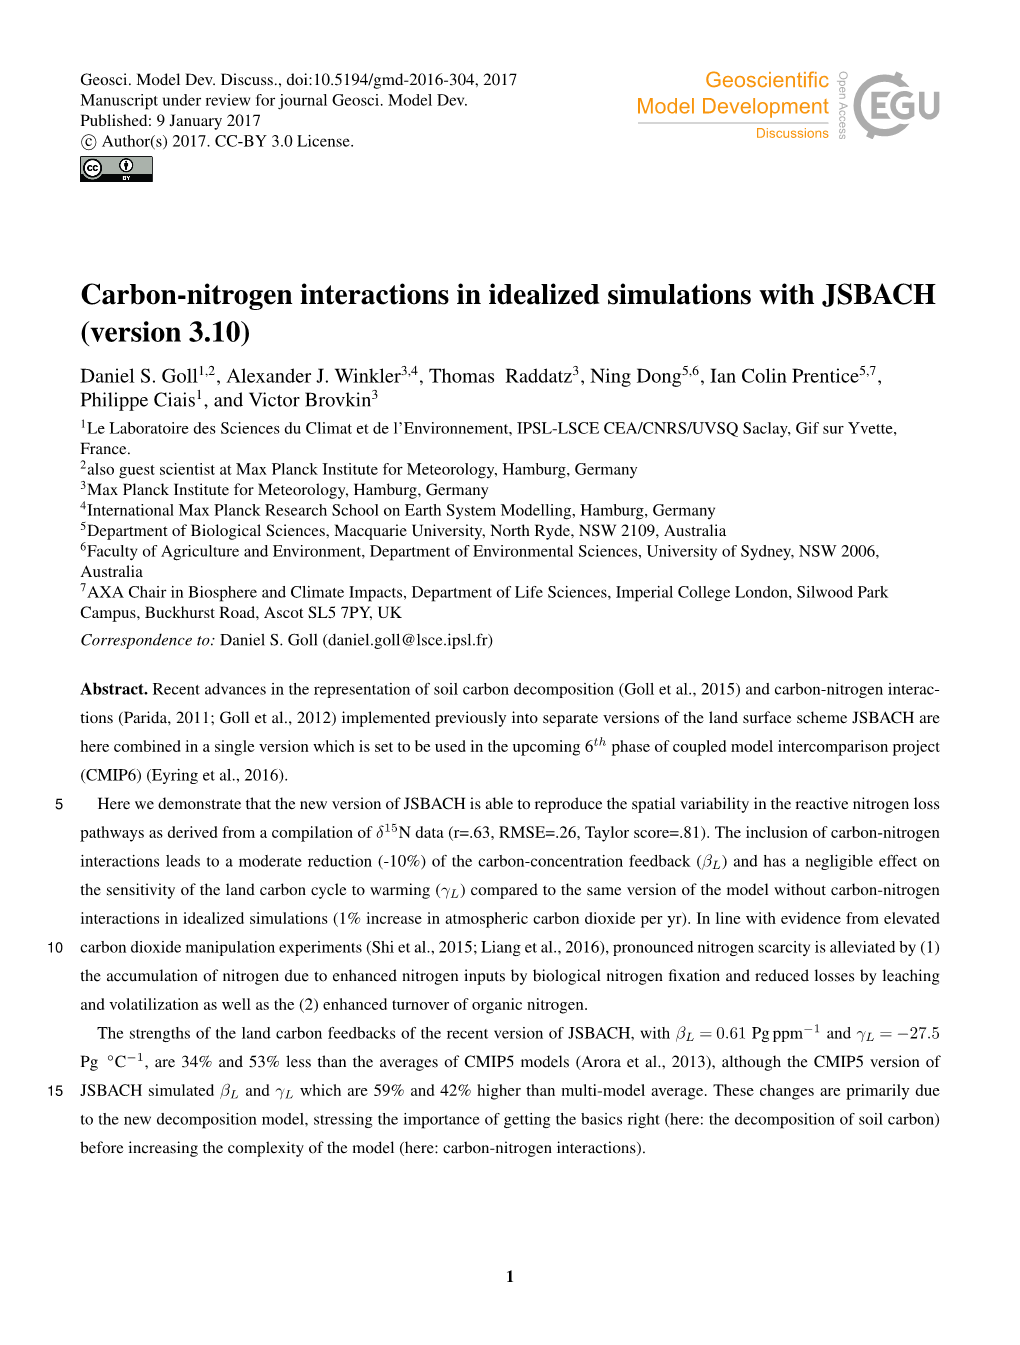 Carbon-Nitrogen Interactions in Idealized Simulations with JSBACH (Version 3.10) Daniel S